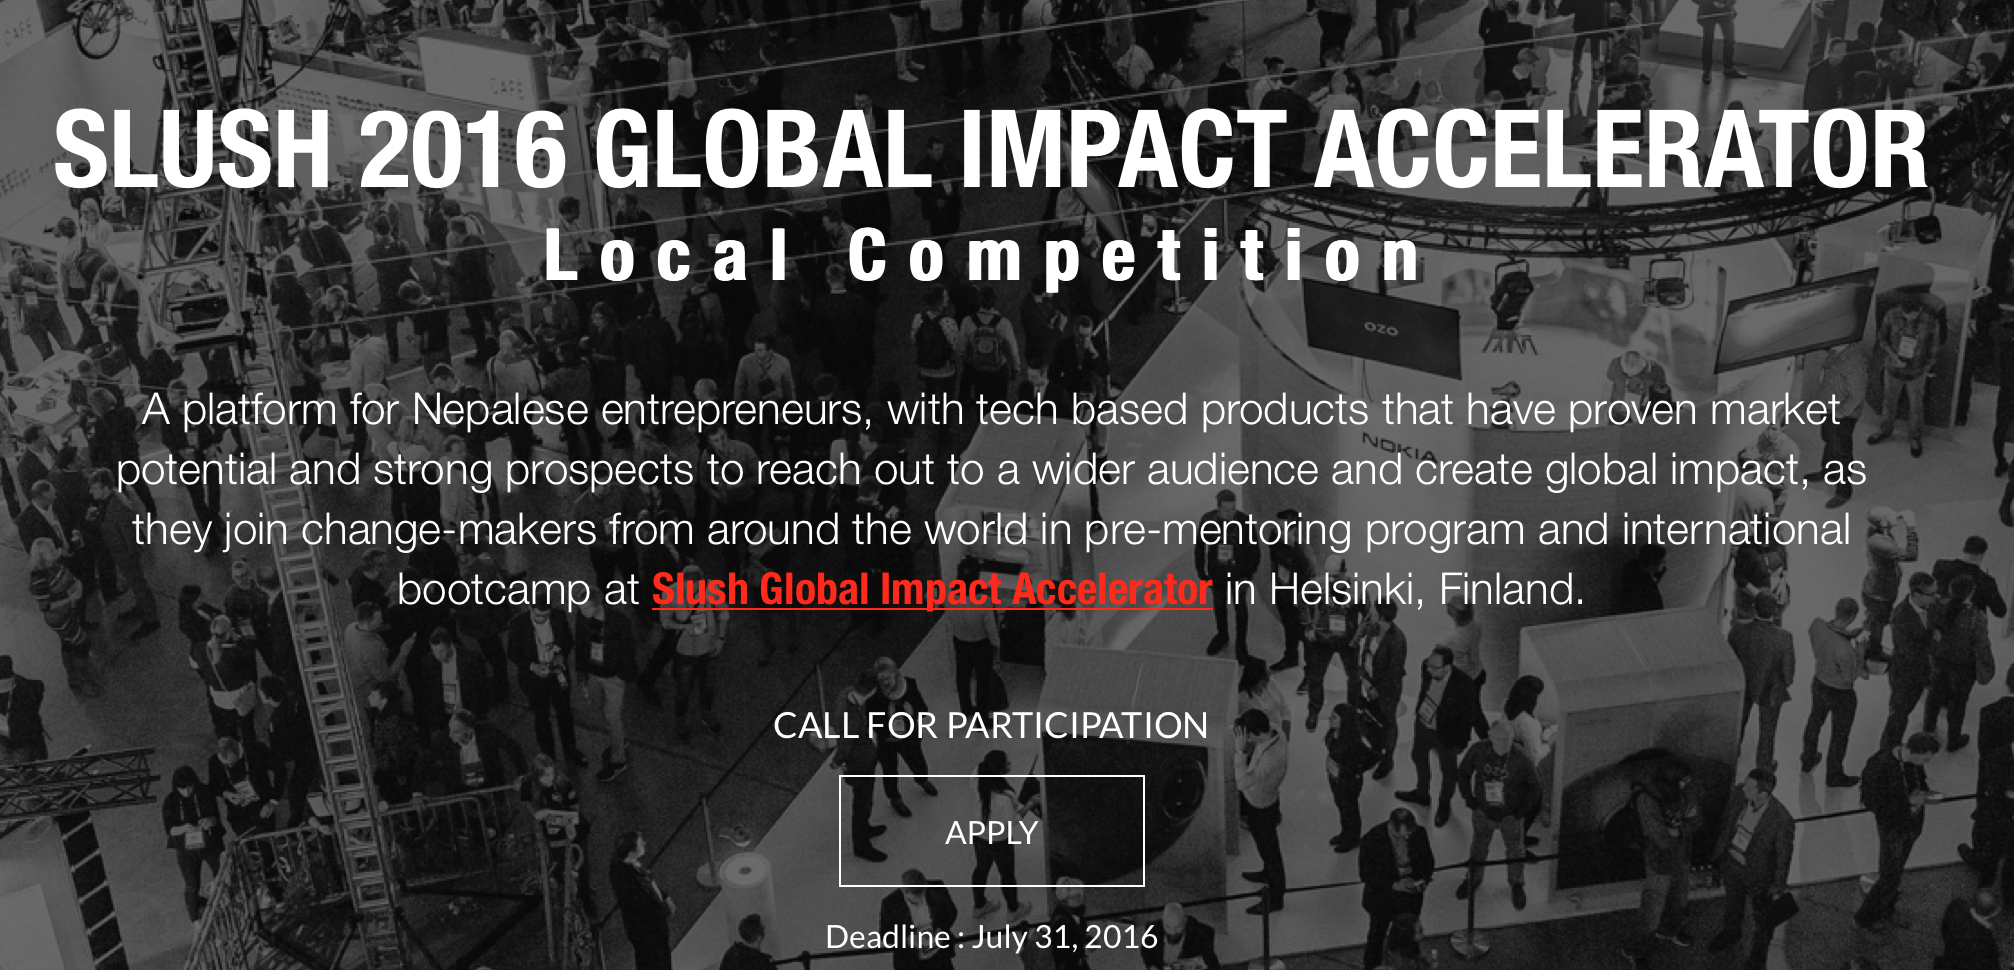 SLUSH Global Impact Accelerator First Time in Nepal – The first step towards making your startup a global phenomenon